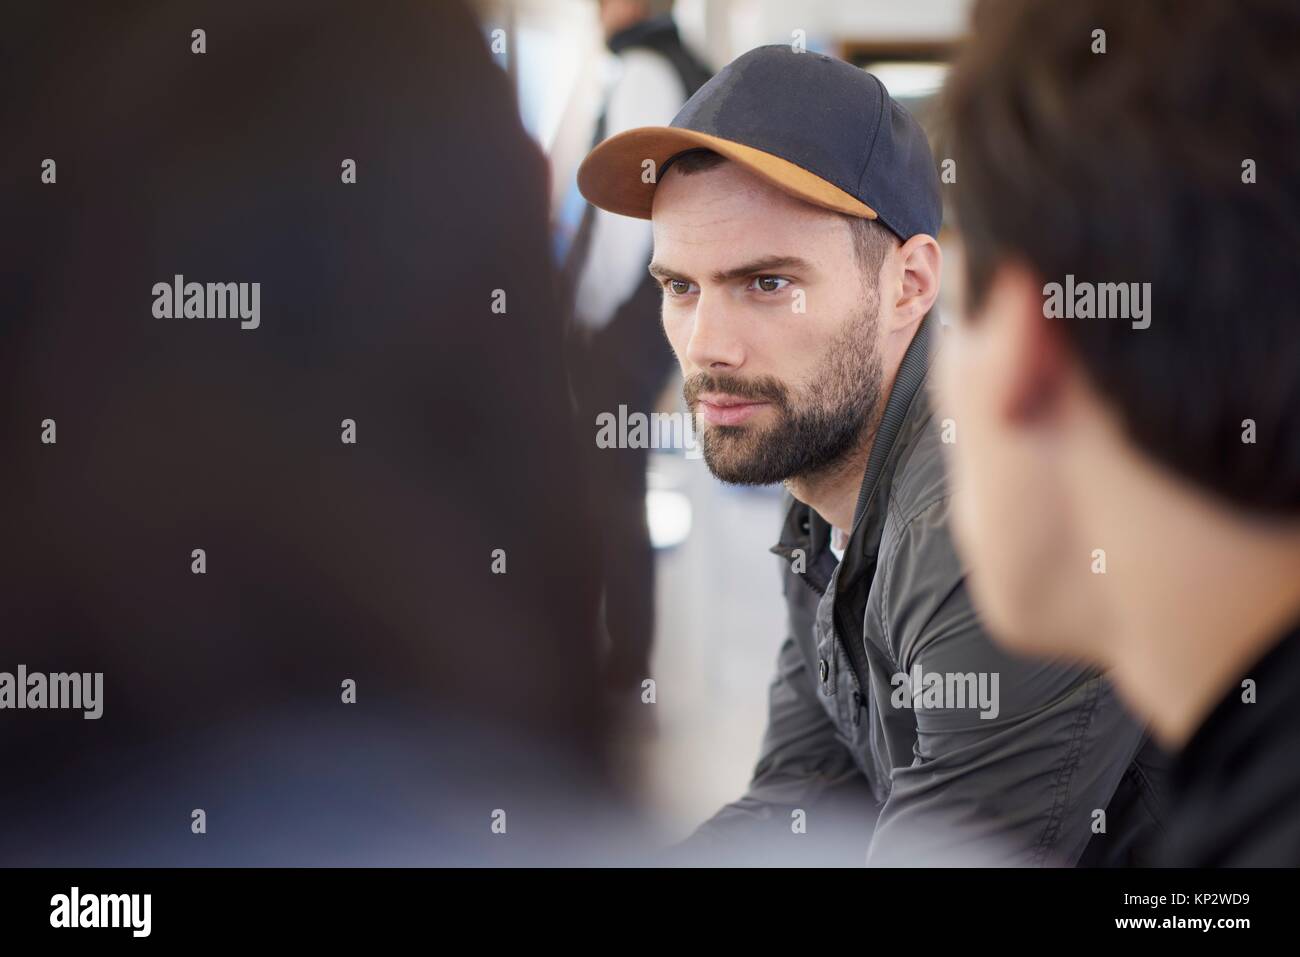 Thoughtful, distracted young man is daydreaming during conversation with friends Stock Photo